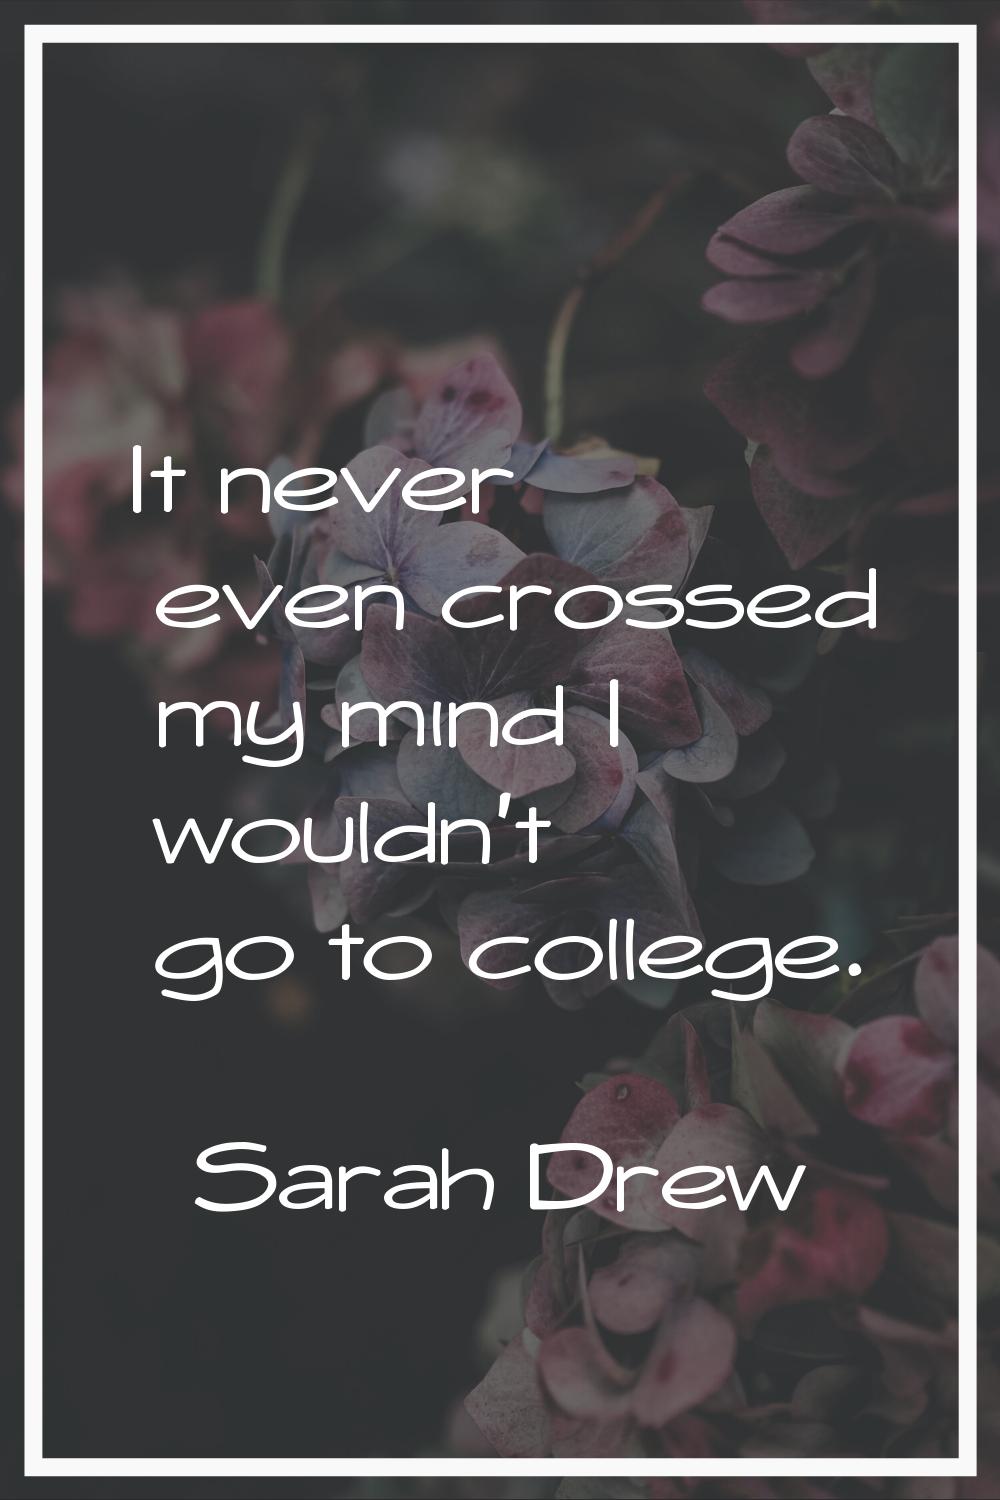 It never even crossed my mind I wouldn't go to college.